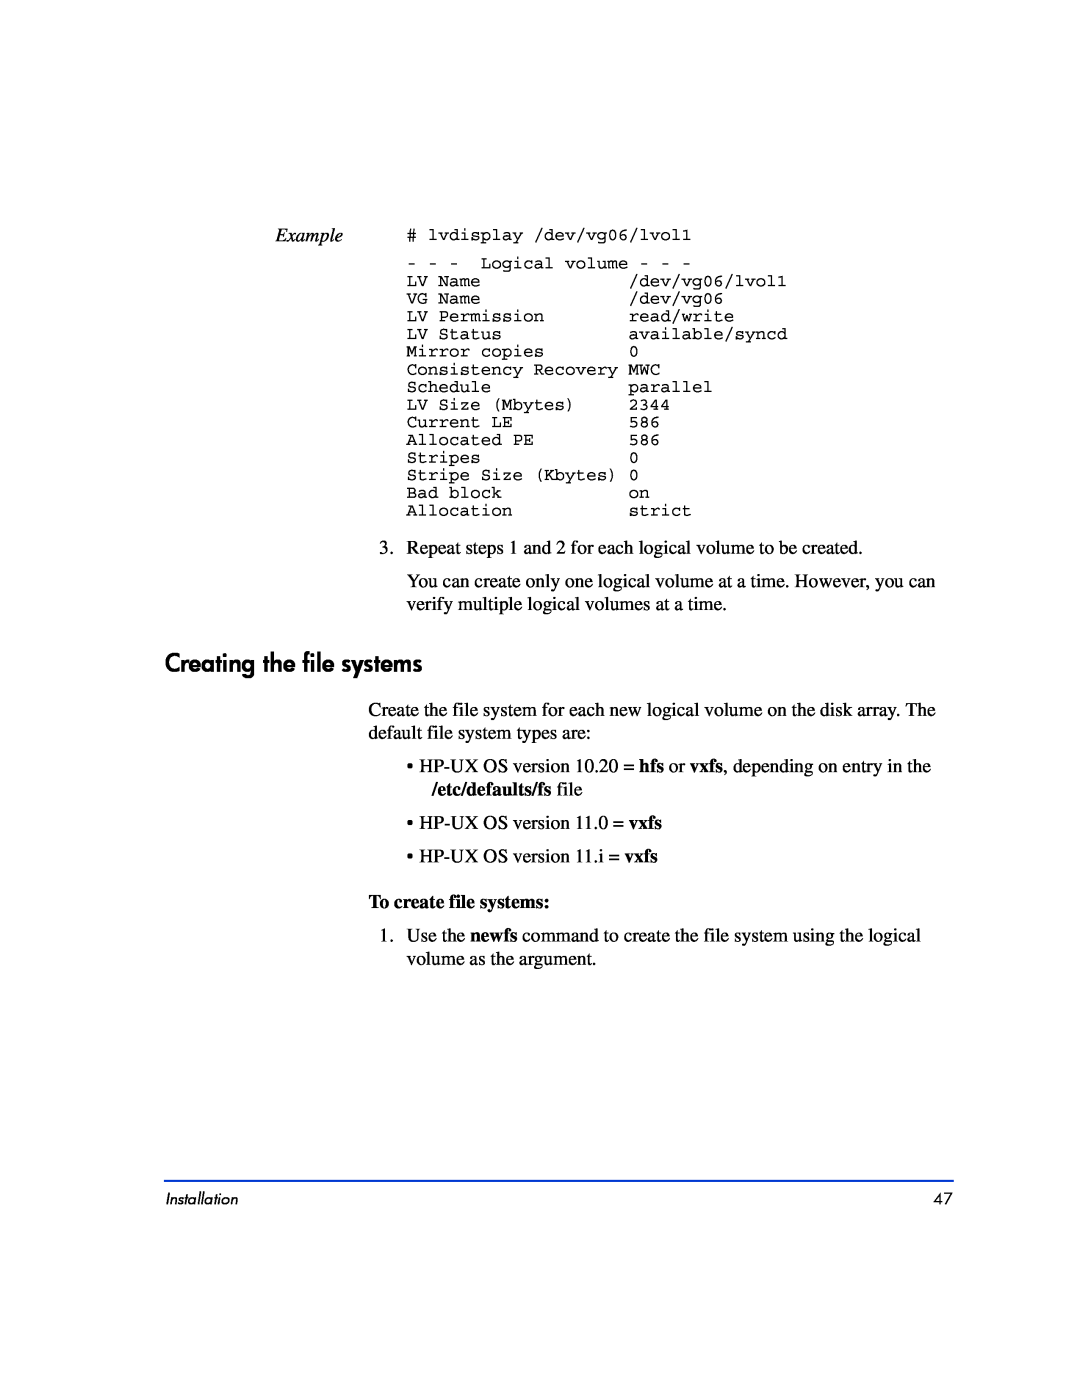 HP XP10000, XP128 manual Creating the file systems, Example, To create file systems 